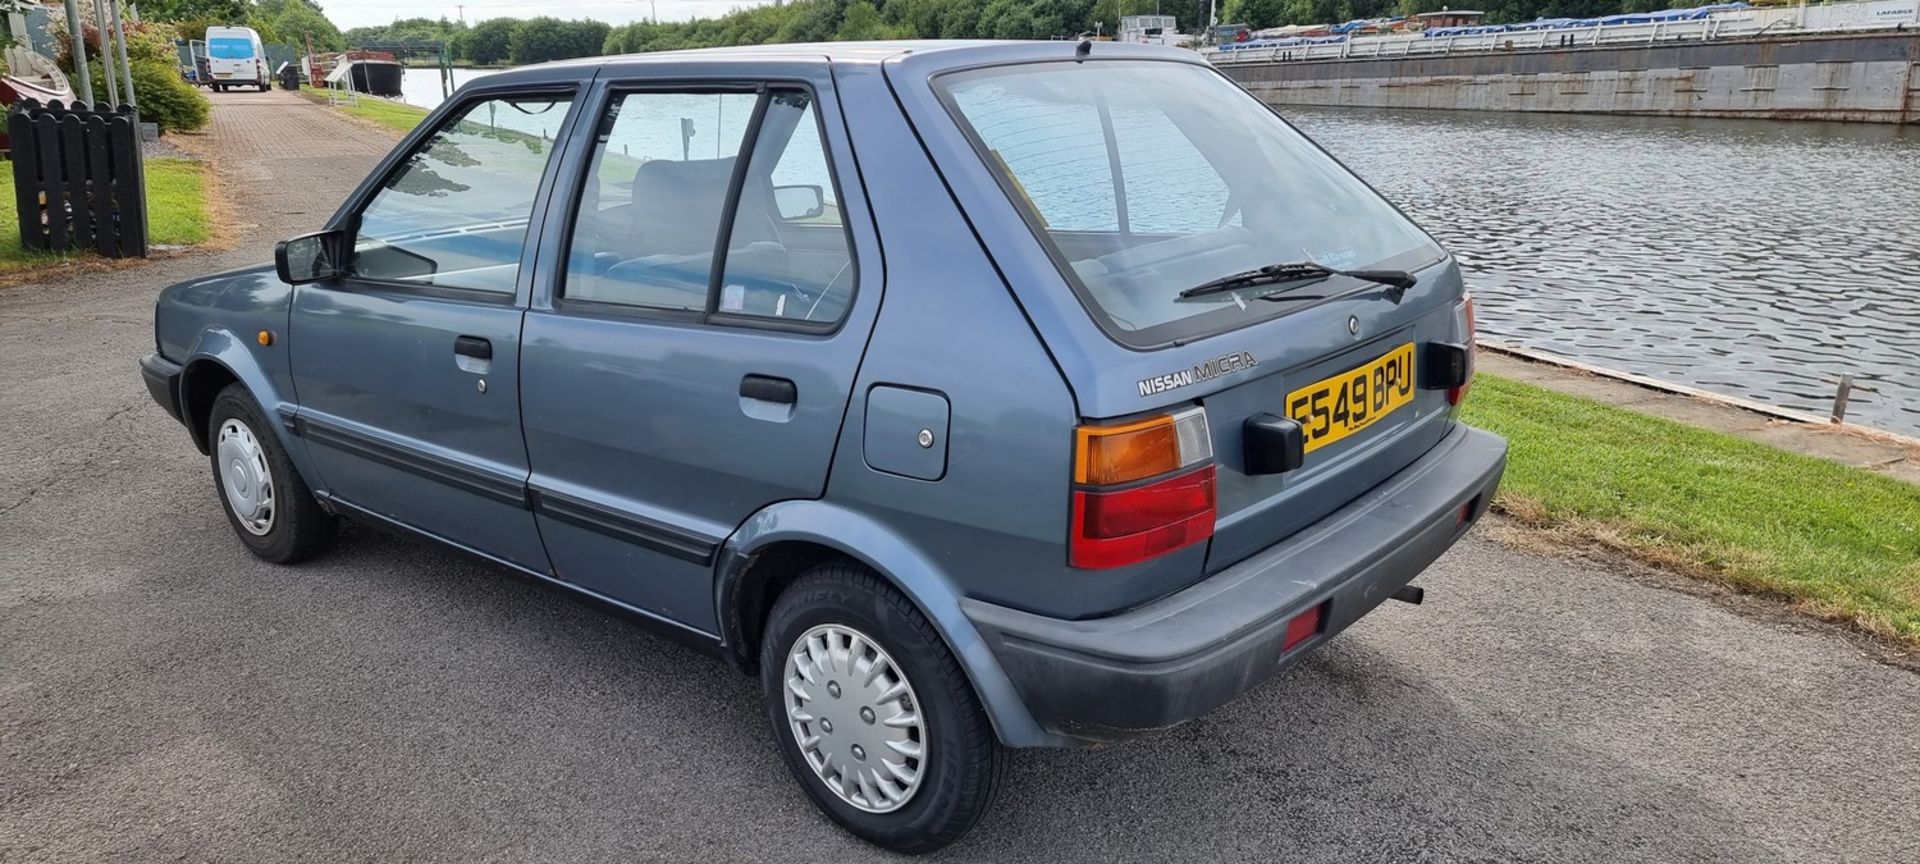 1987 Nissan Micra SGL automatic, 998cc. Registration number E549 BPU. Chassis number K10 429826. - Image 3 of 15